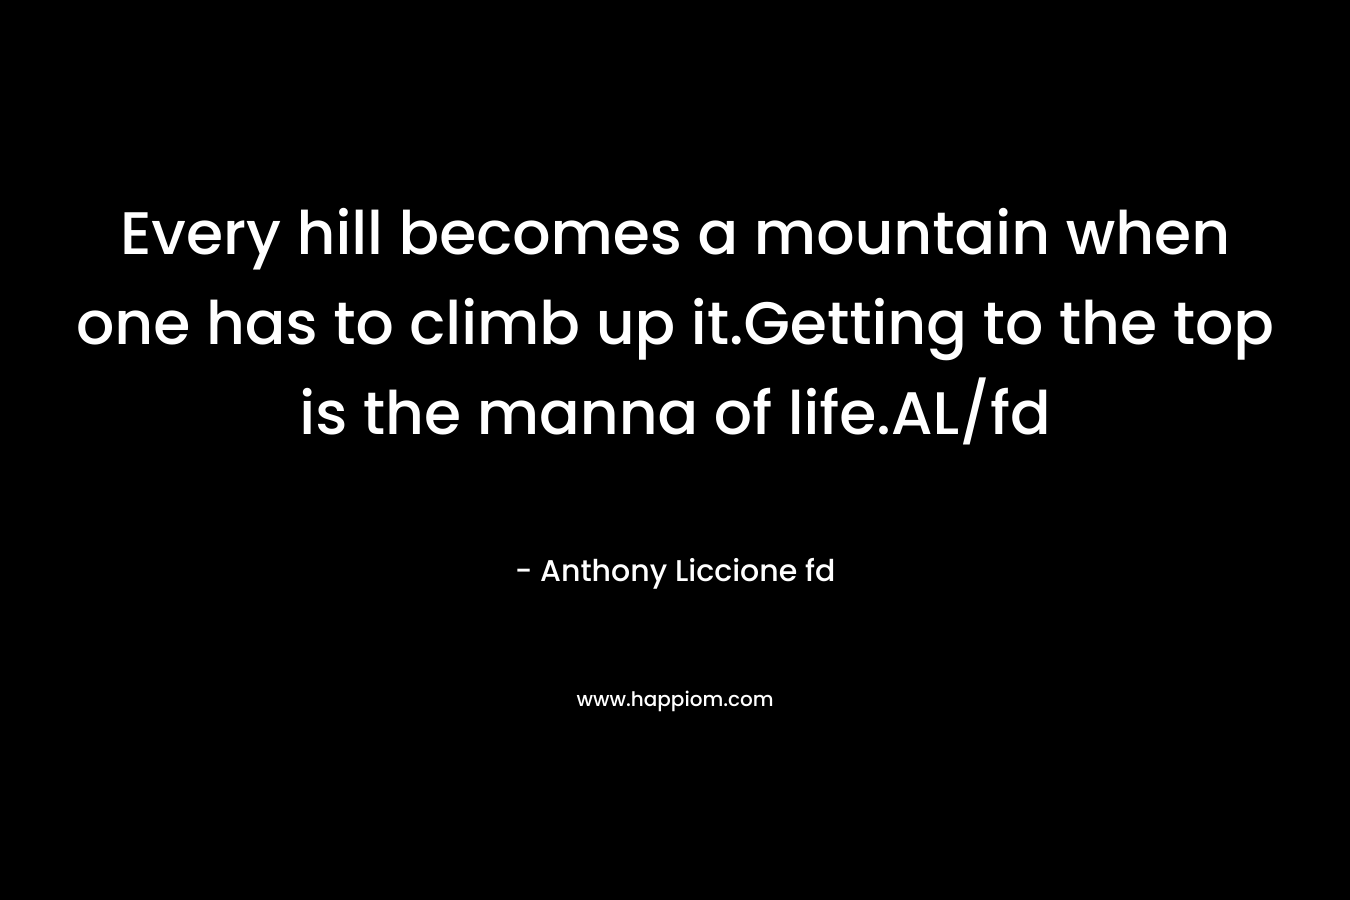 Every hill becomes a mountain when one has to climb up it.Getting to the top is the manna of life.AL/fd – Anthony Liccione fd